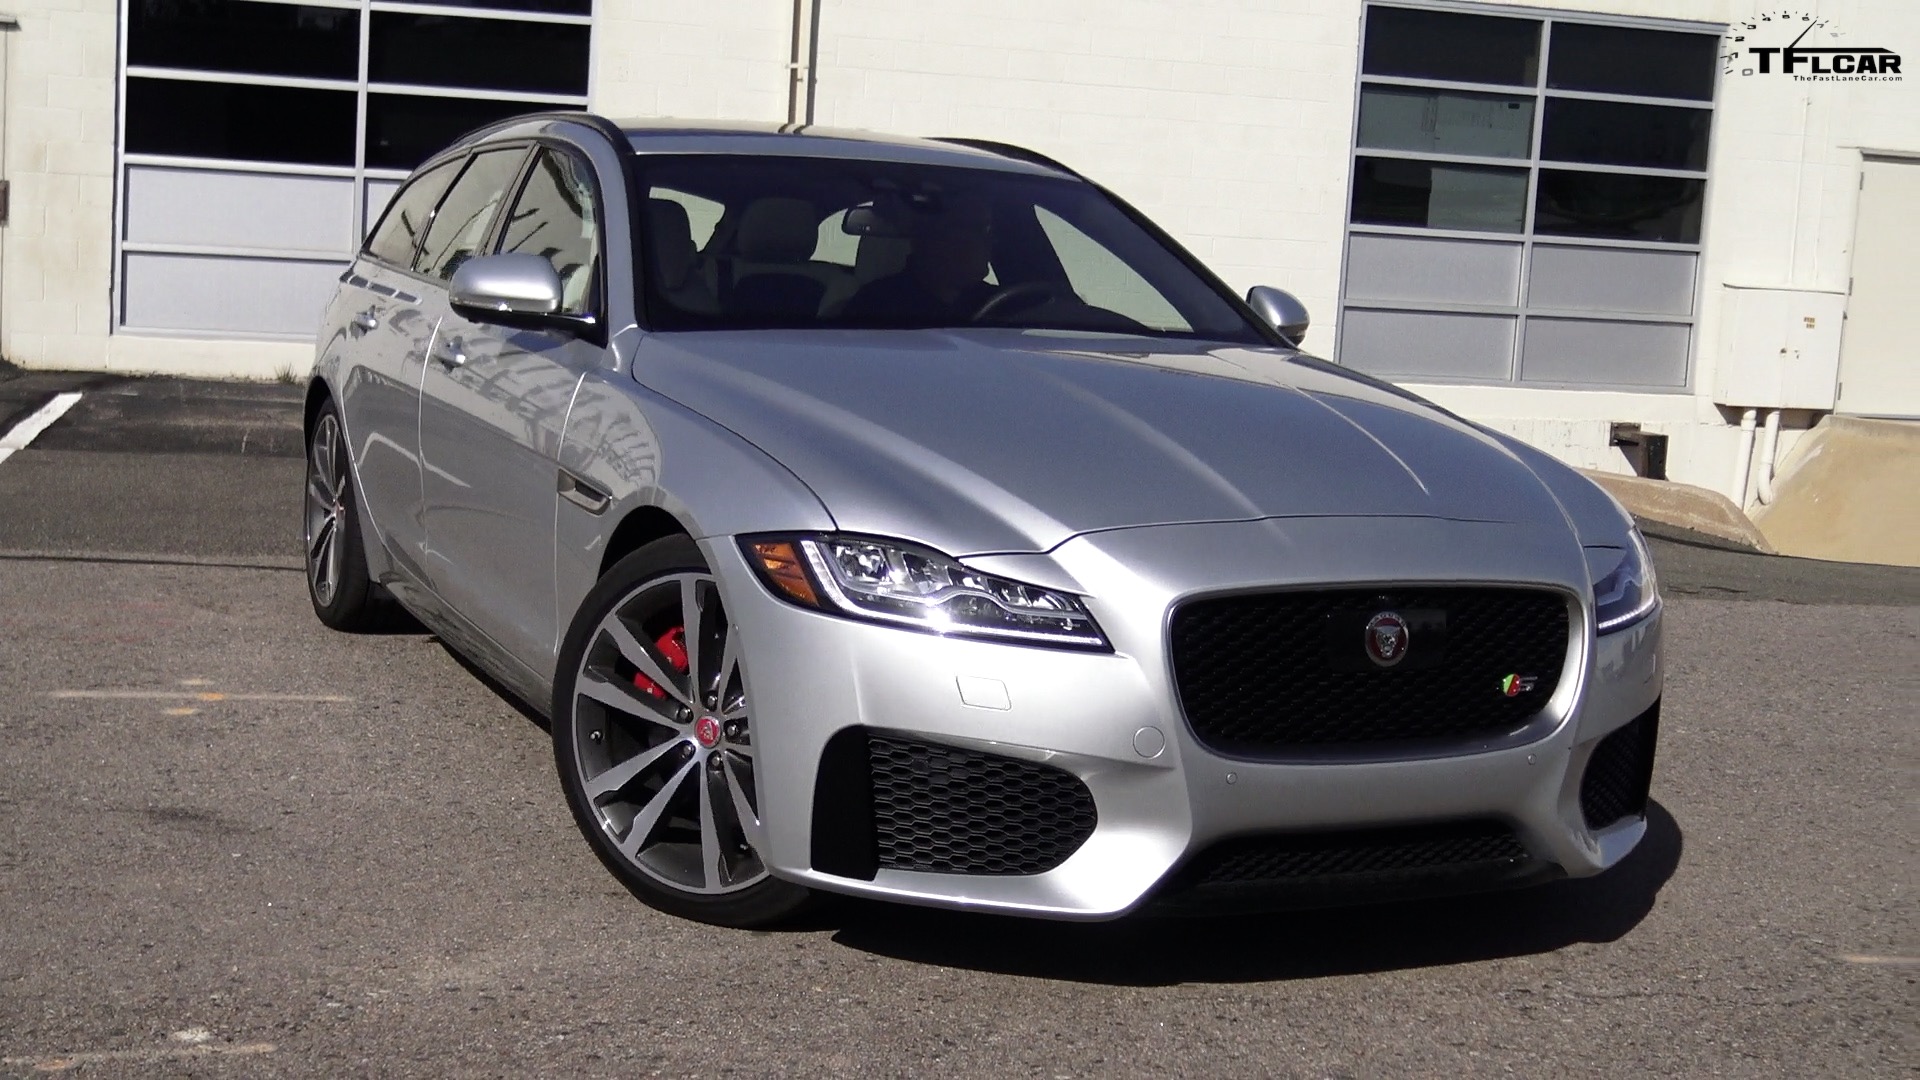 What's Good, Bad and Weird About the 2018 Jaguar XF S ...